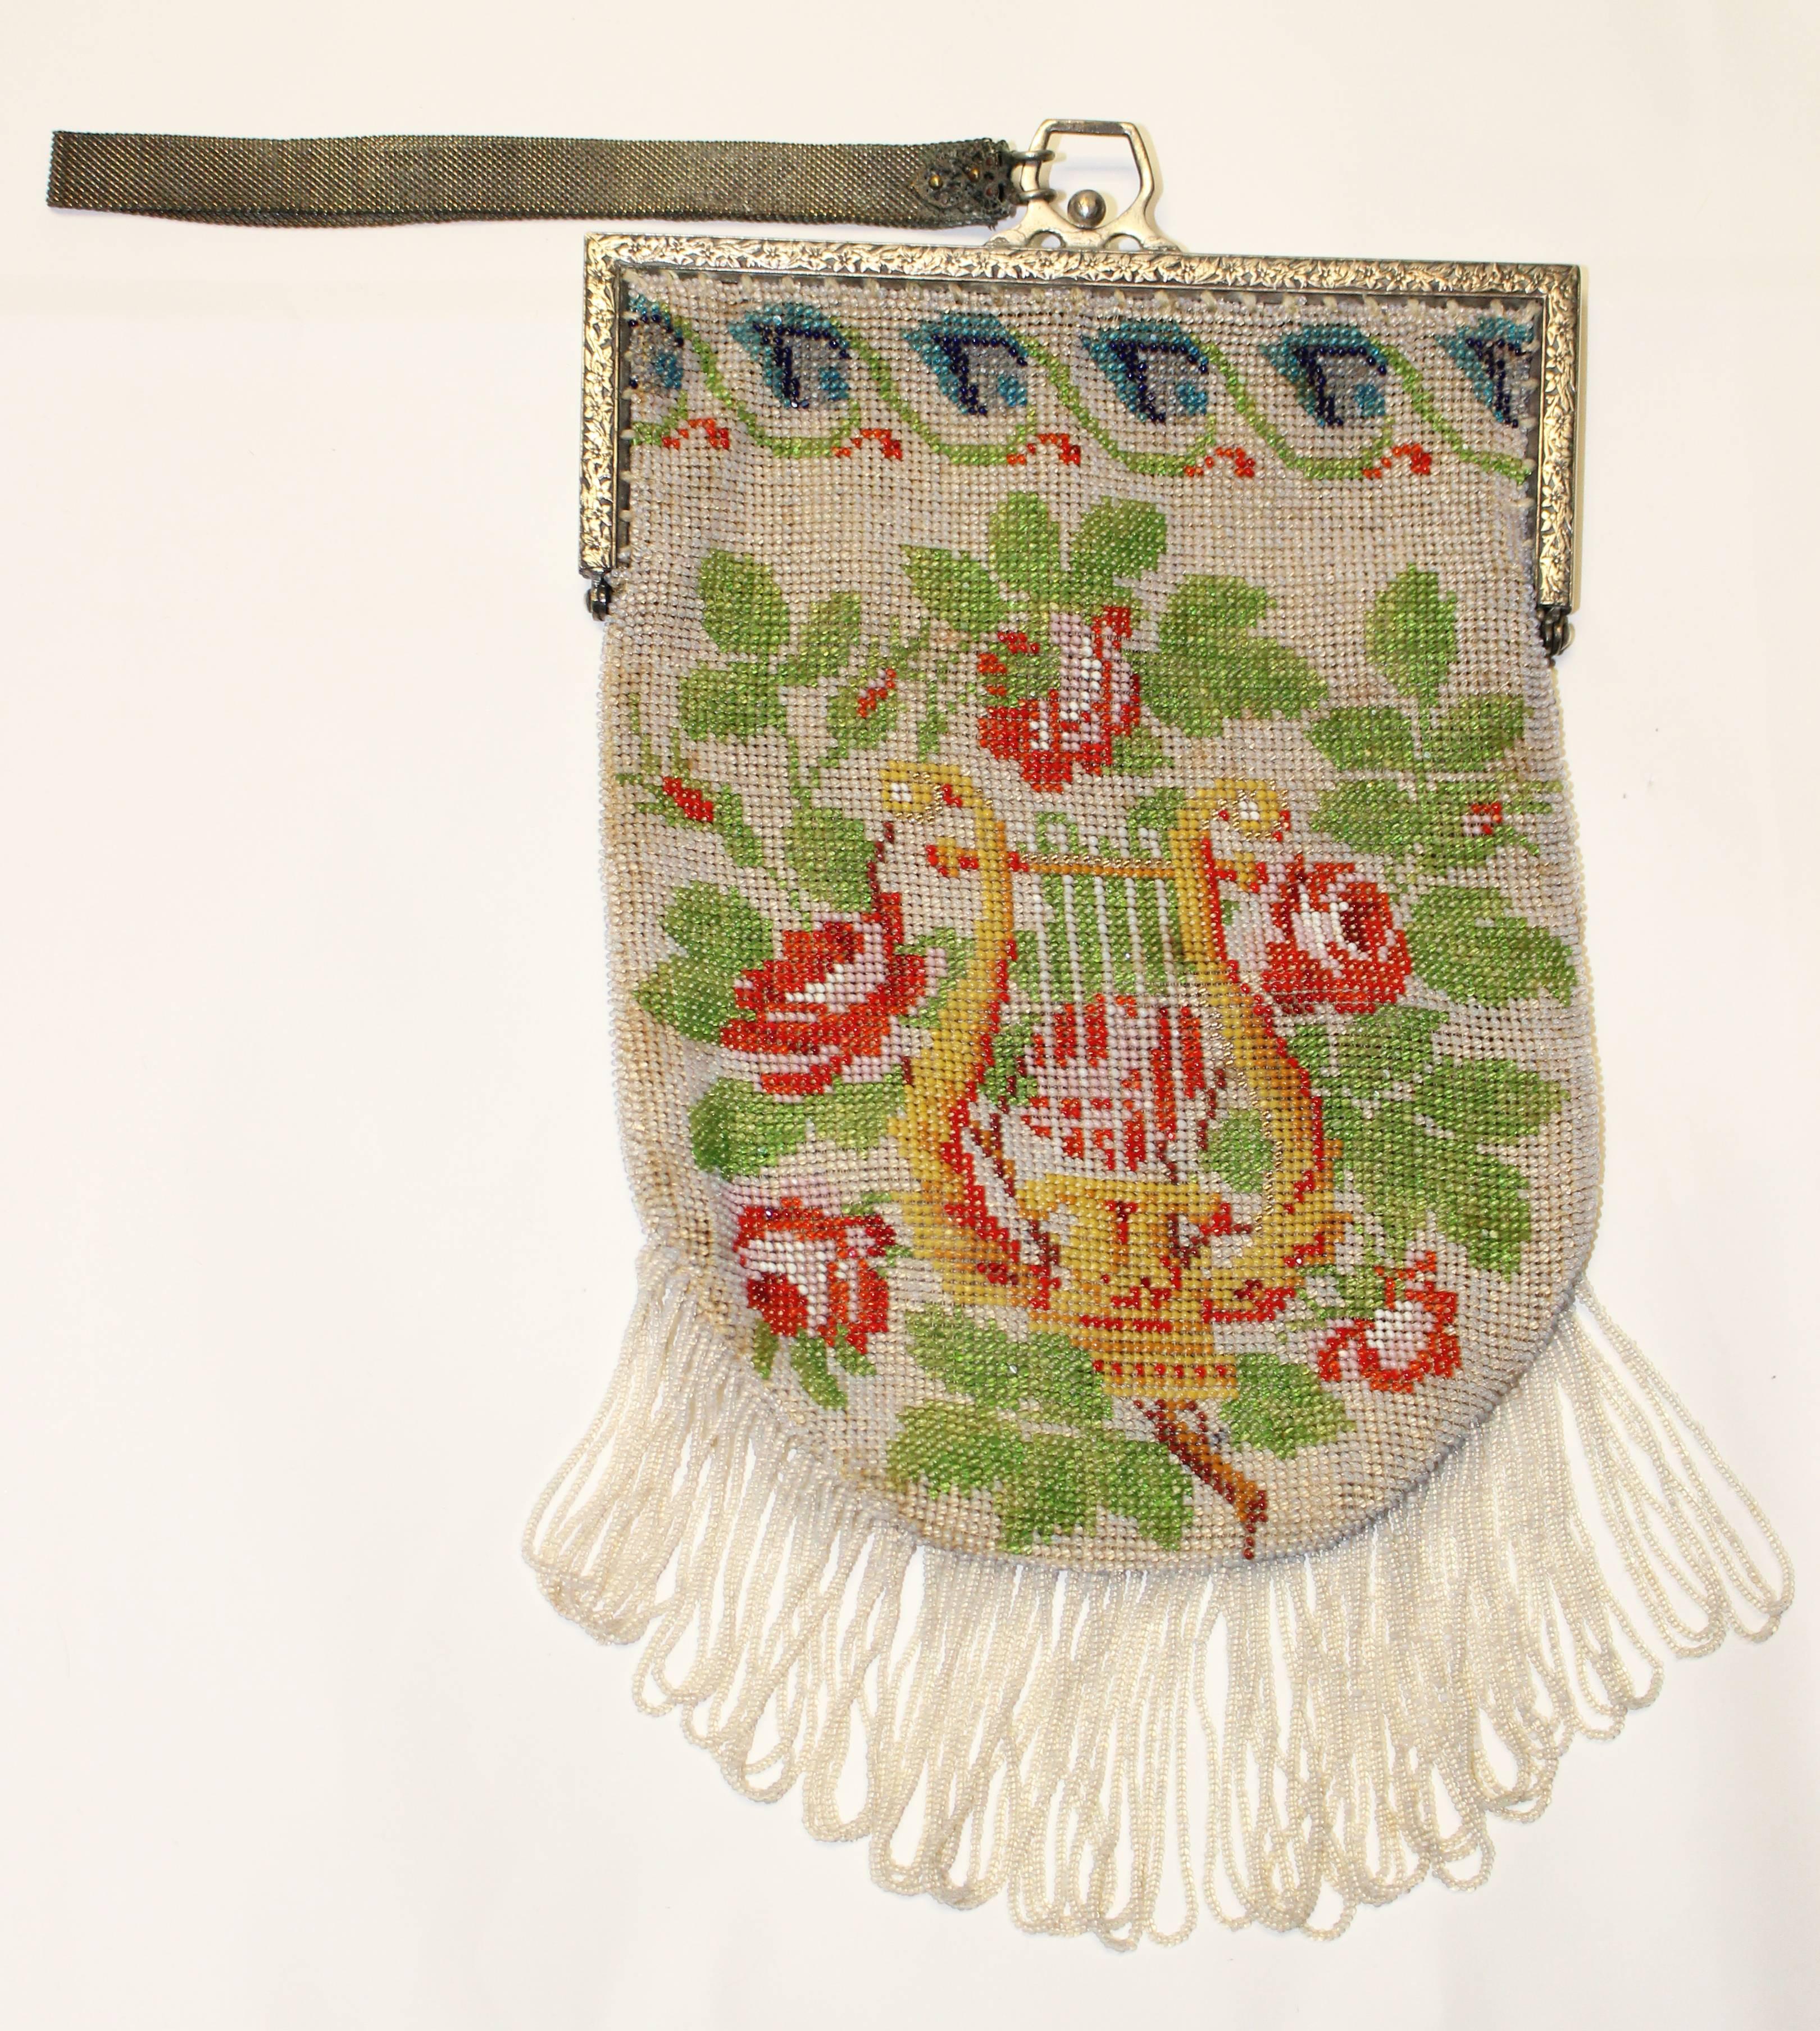 1920's hand-beaded purse with green leaves, red roses, and harp against a white field in seed beads. Blue flowers border the top edge. Silver tone embossed frame. Unlined. Looped seed bead fringe. Mesh wristlet.

Measurements:
Frame: 6"